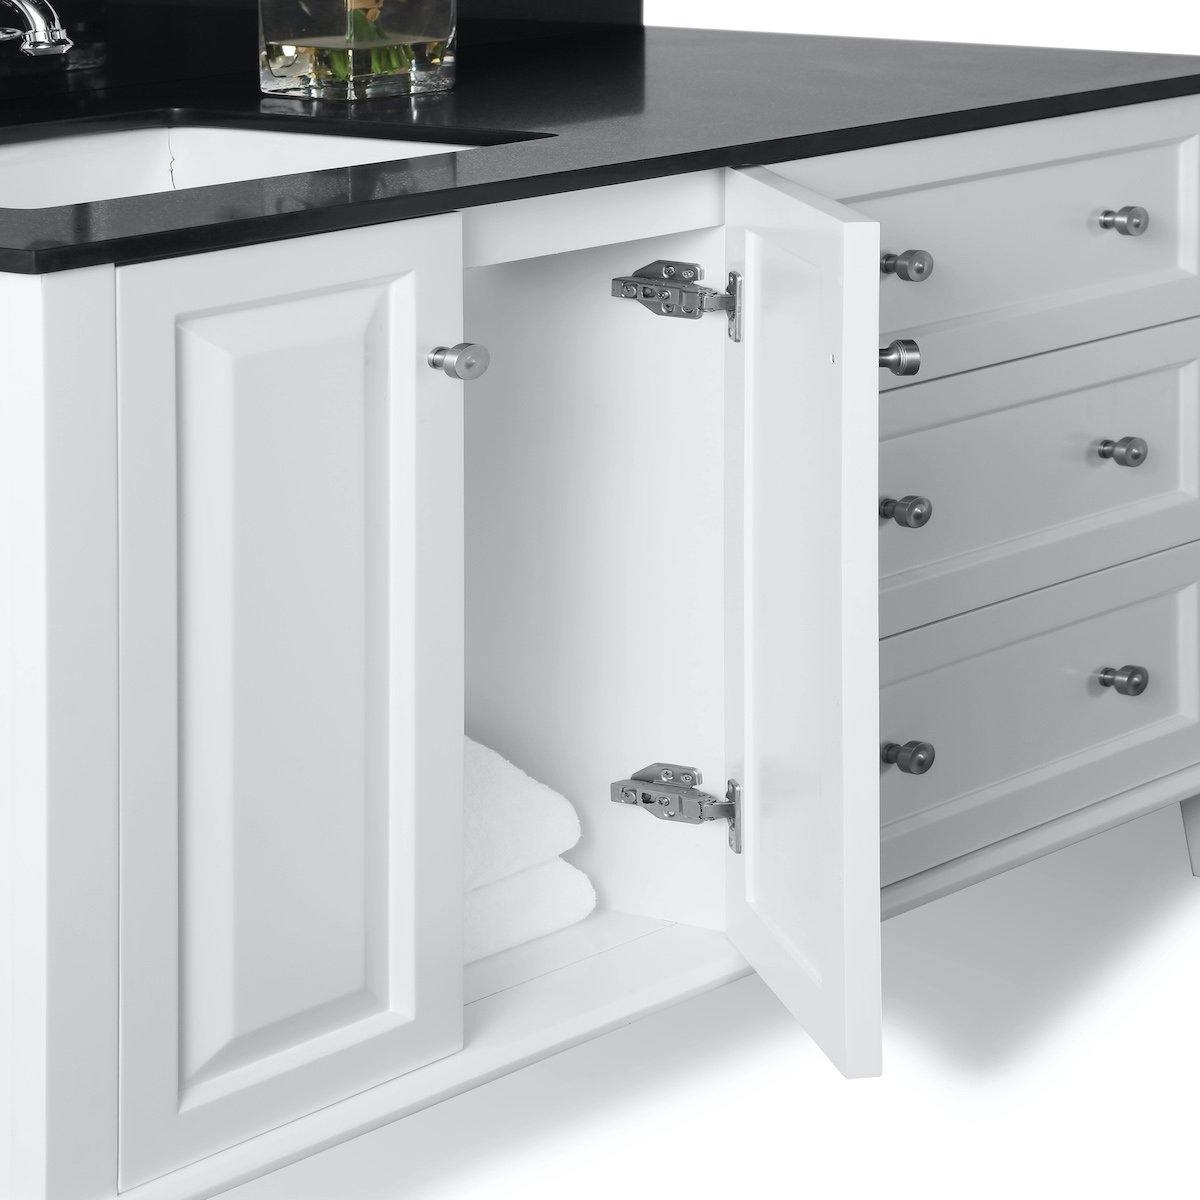 Ancerre Designs Hannah 48 Inch White Single Vanity with Left Basin and Nickel Hardware Inside Cabinet